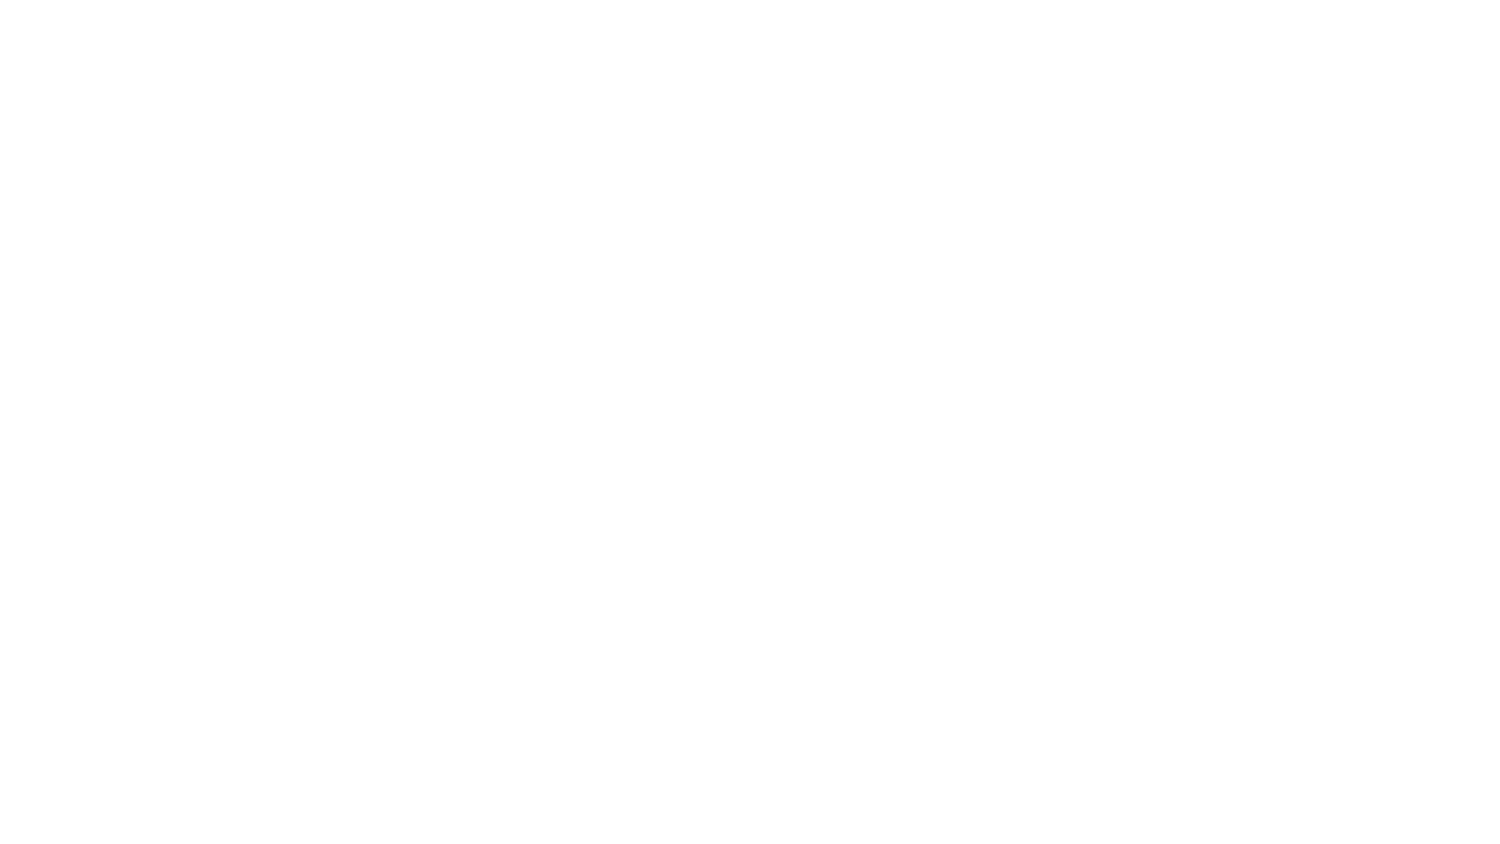 Resilience Adaptability and Wellbeing from Oasis School of Human Relations